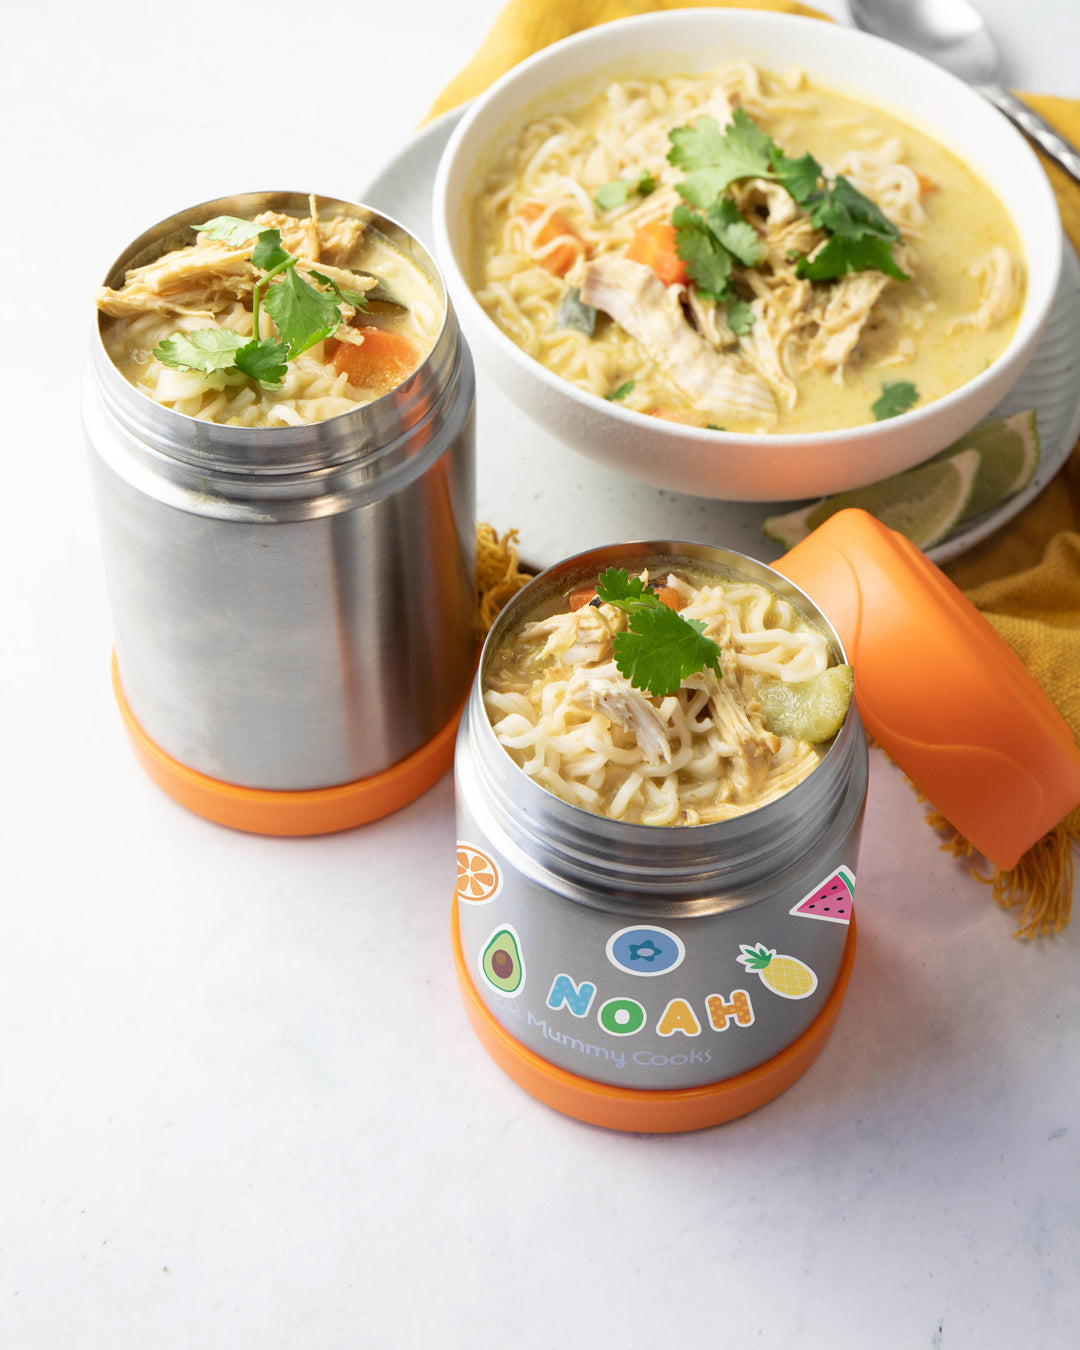 https://cdn.shopify.com/s/files/1/2205/4485/files/Coconut-Chicken-Noodle-Soup-with-stickers-1080x1350-2.jpg?v=1660178233